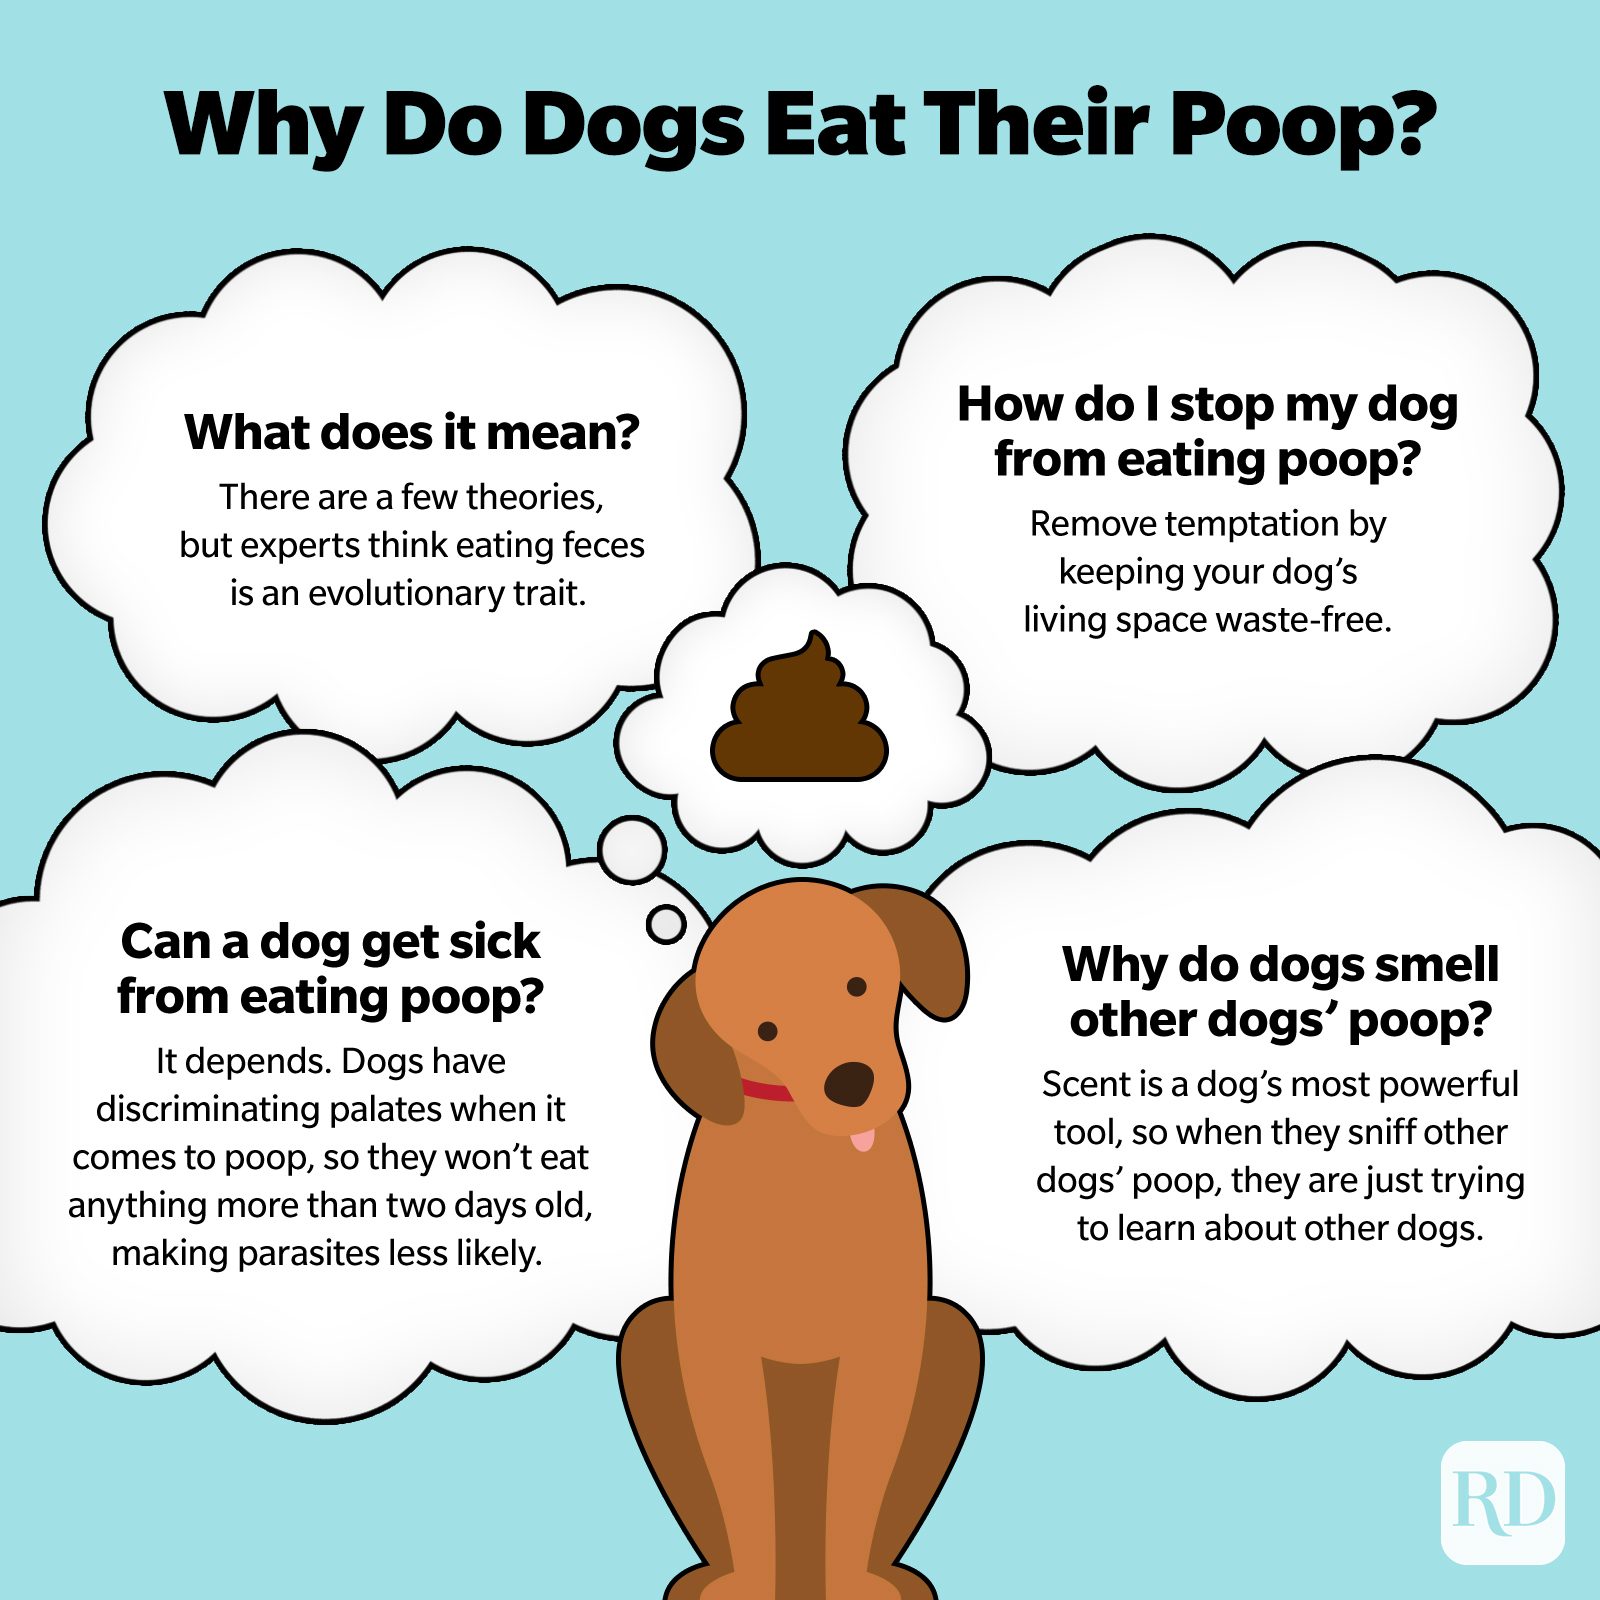 How To Keep A Dog From Eating Its Own Feces